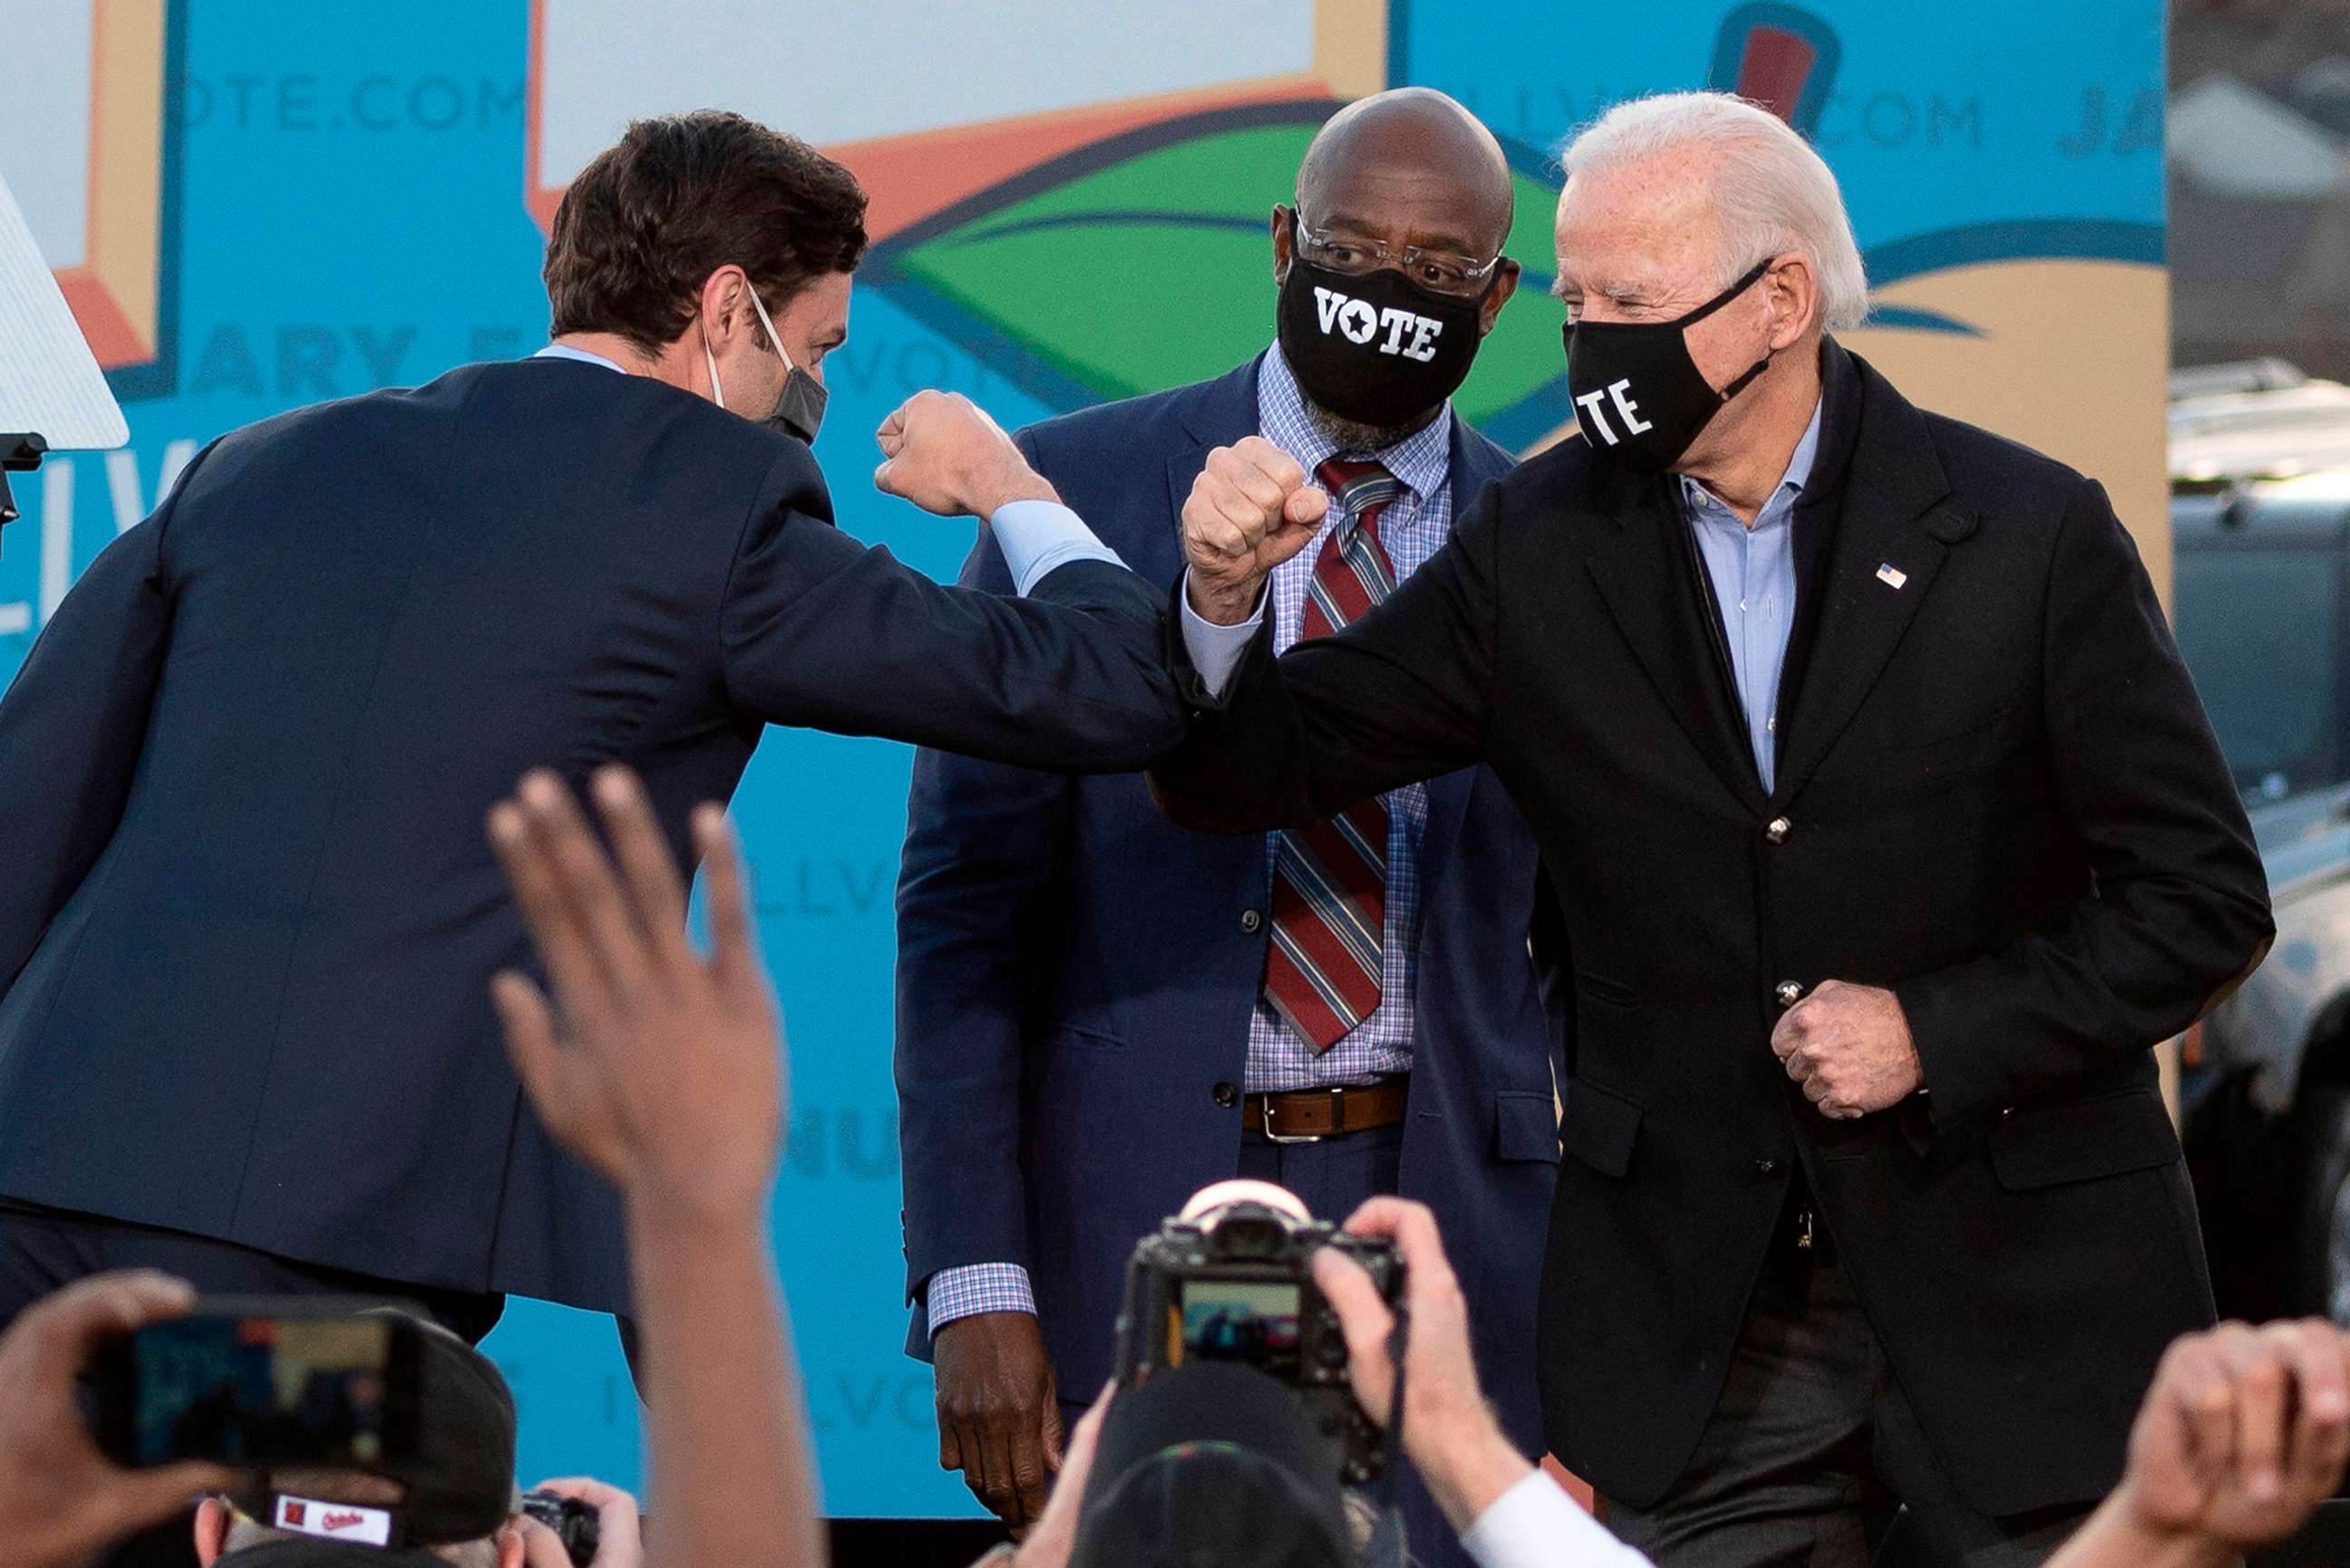 PHOTO: In this Jan. 4, 2021, file photo, Democratic candidates for Senate Jon Ossoff, Raphael Warnock, cener, and President-elect Joe Biden bump elbows on stage during a rally outside Center Parc Stadium in Atlanta.